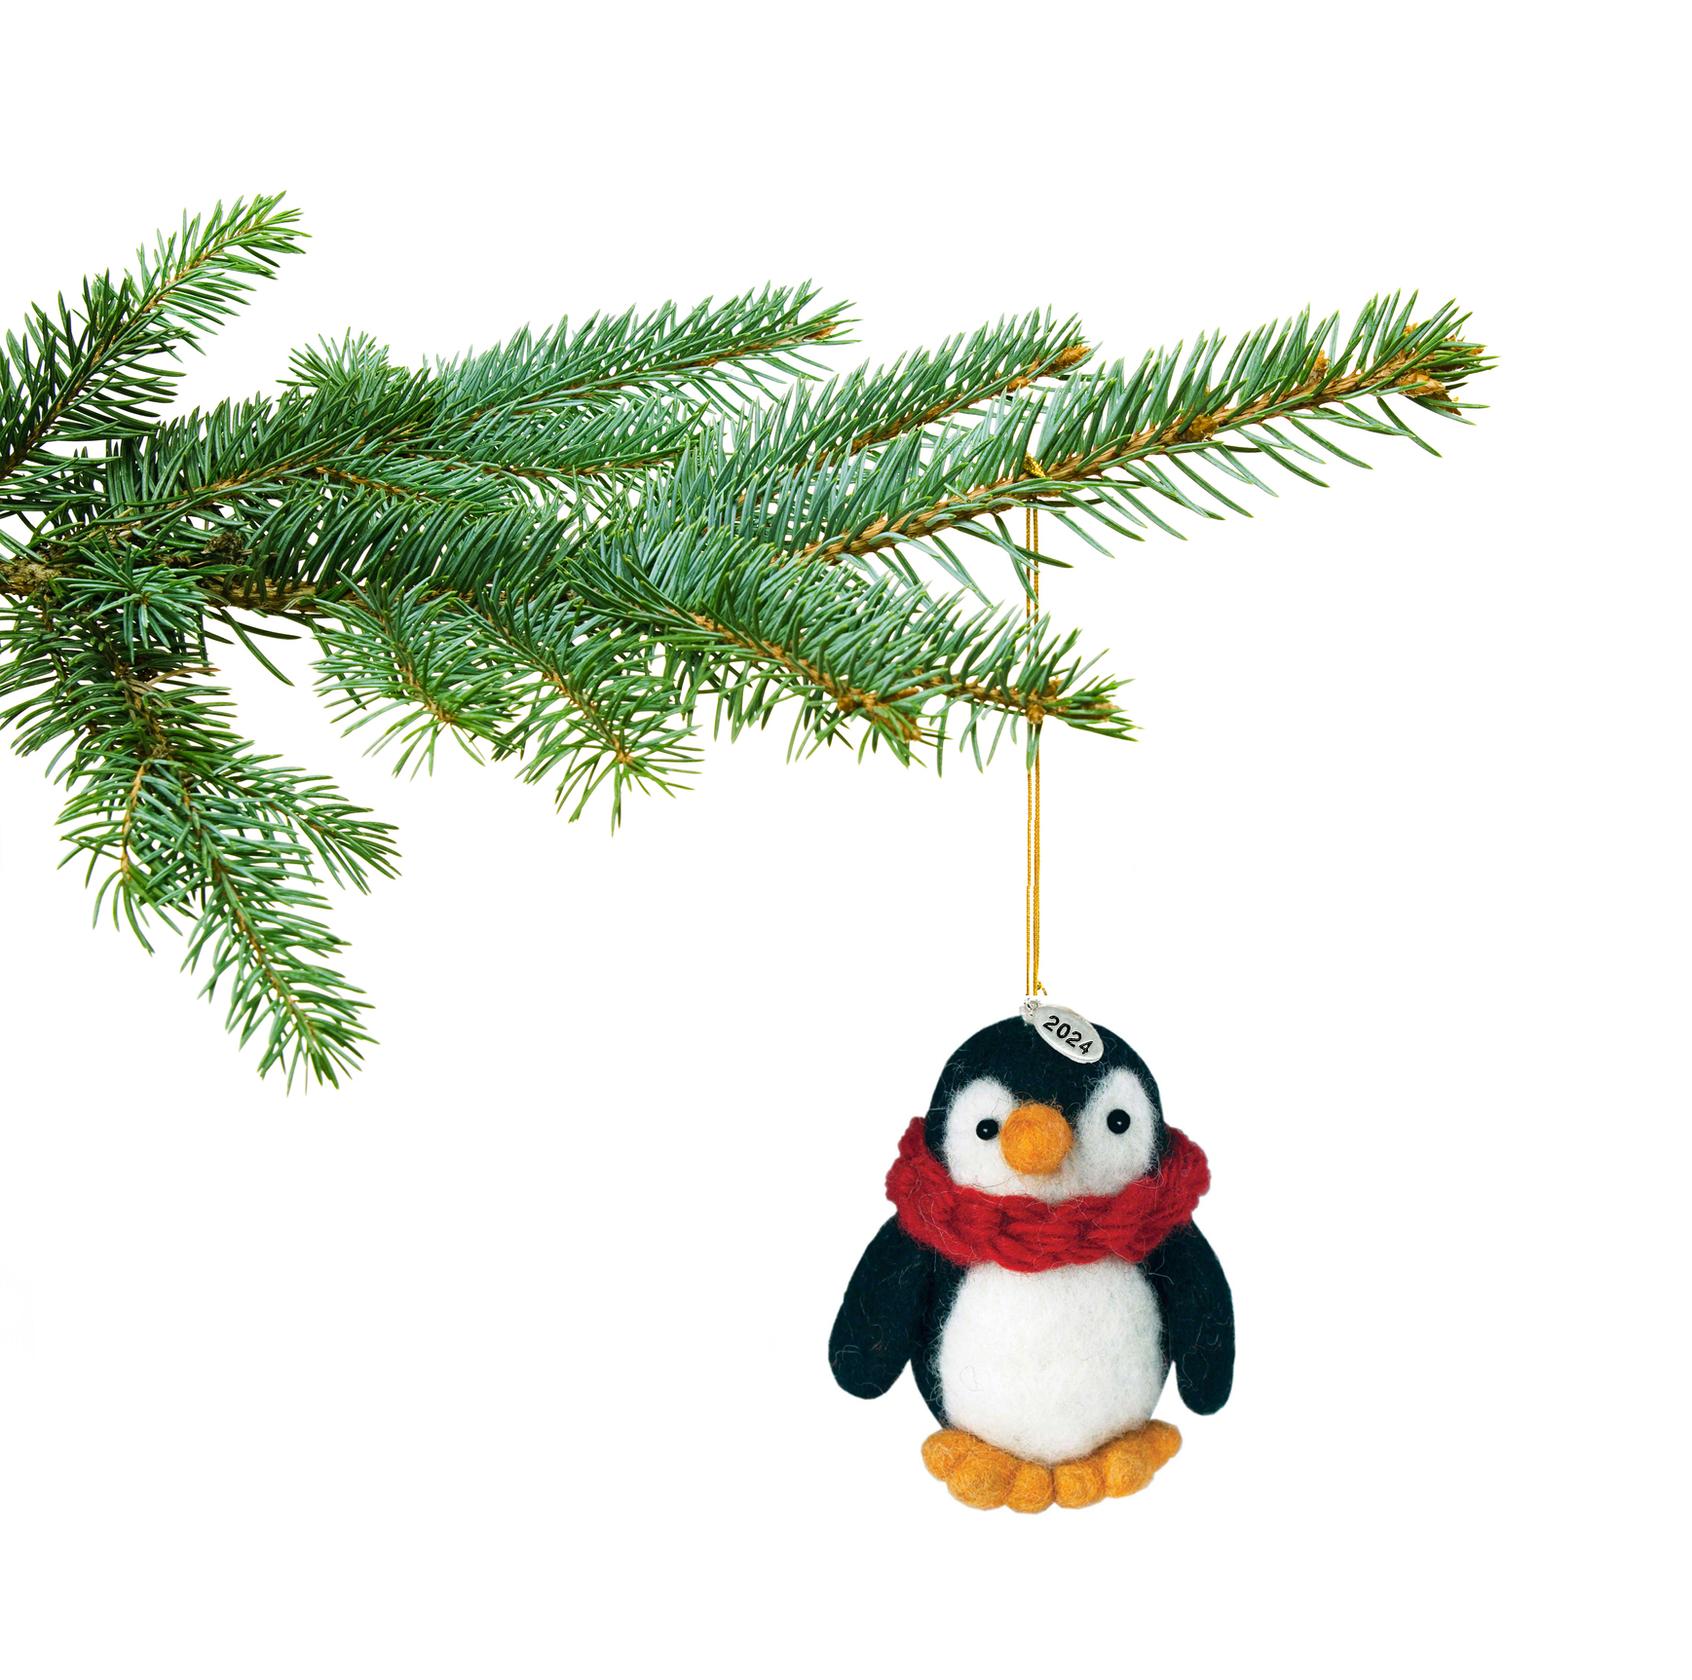 Felt Penguin Christmas Ornament 2024 - Fair Trade, Hand Felted Made in Nepal - Comes in a Gift Bag